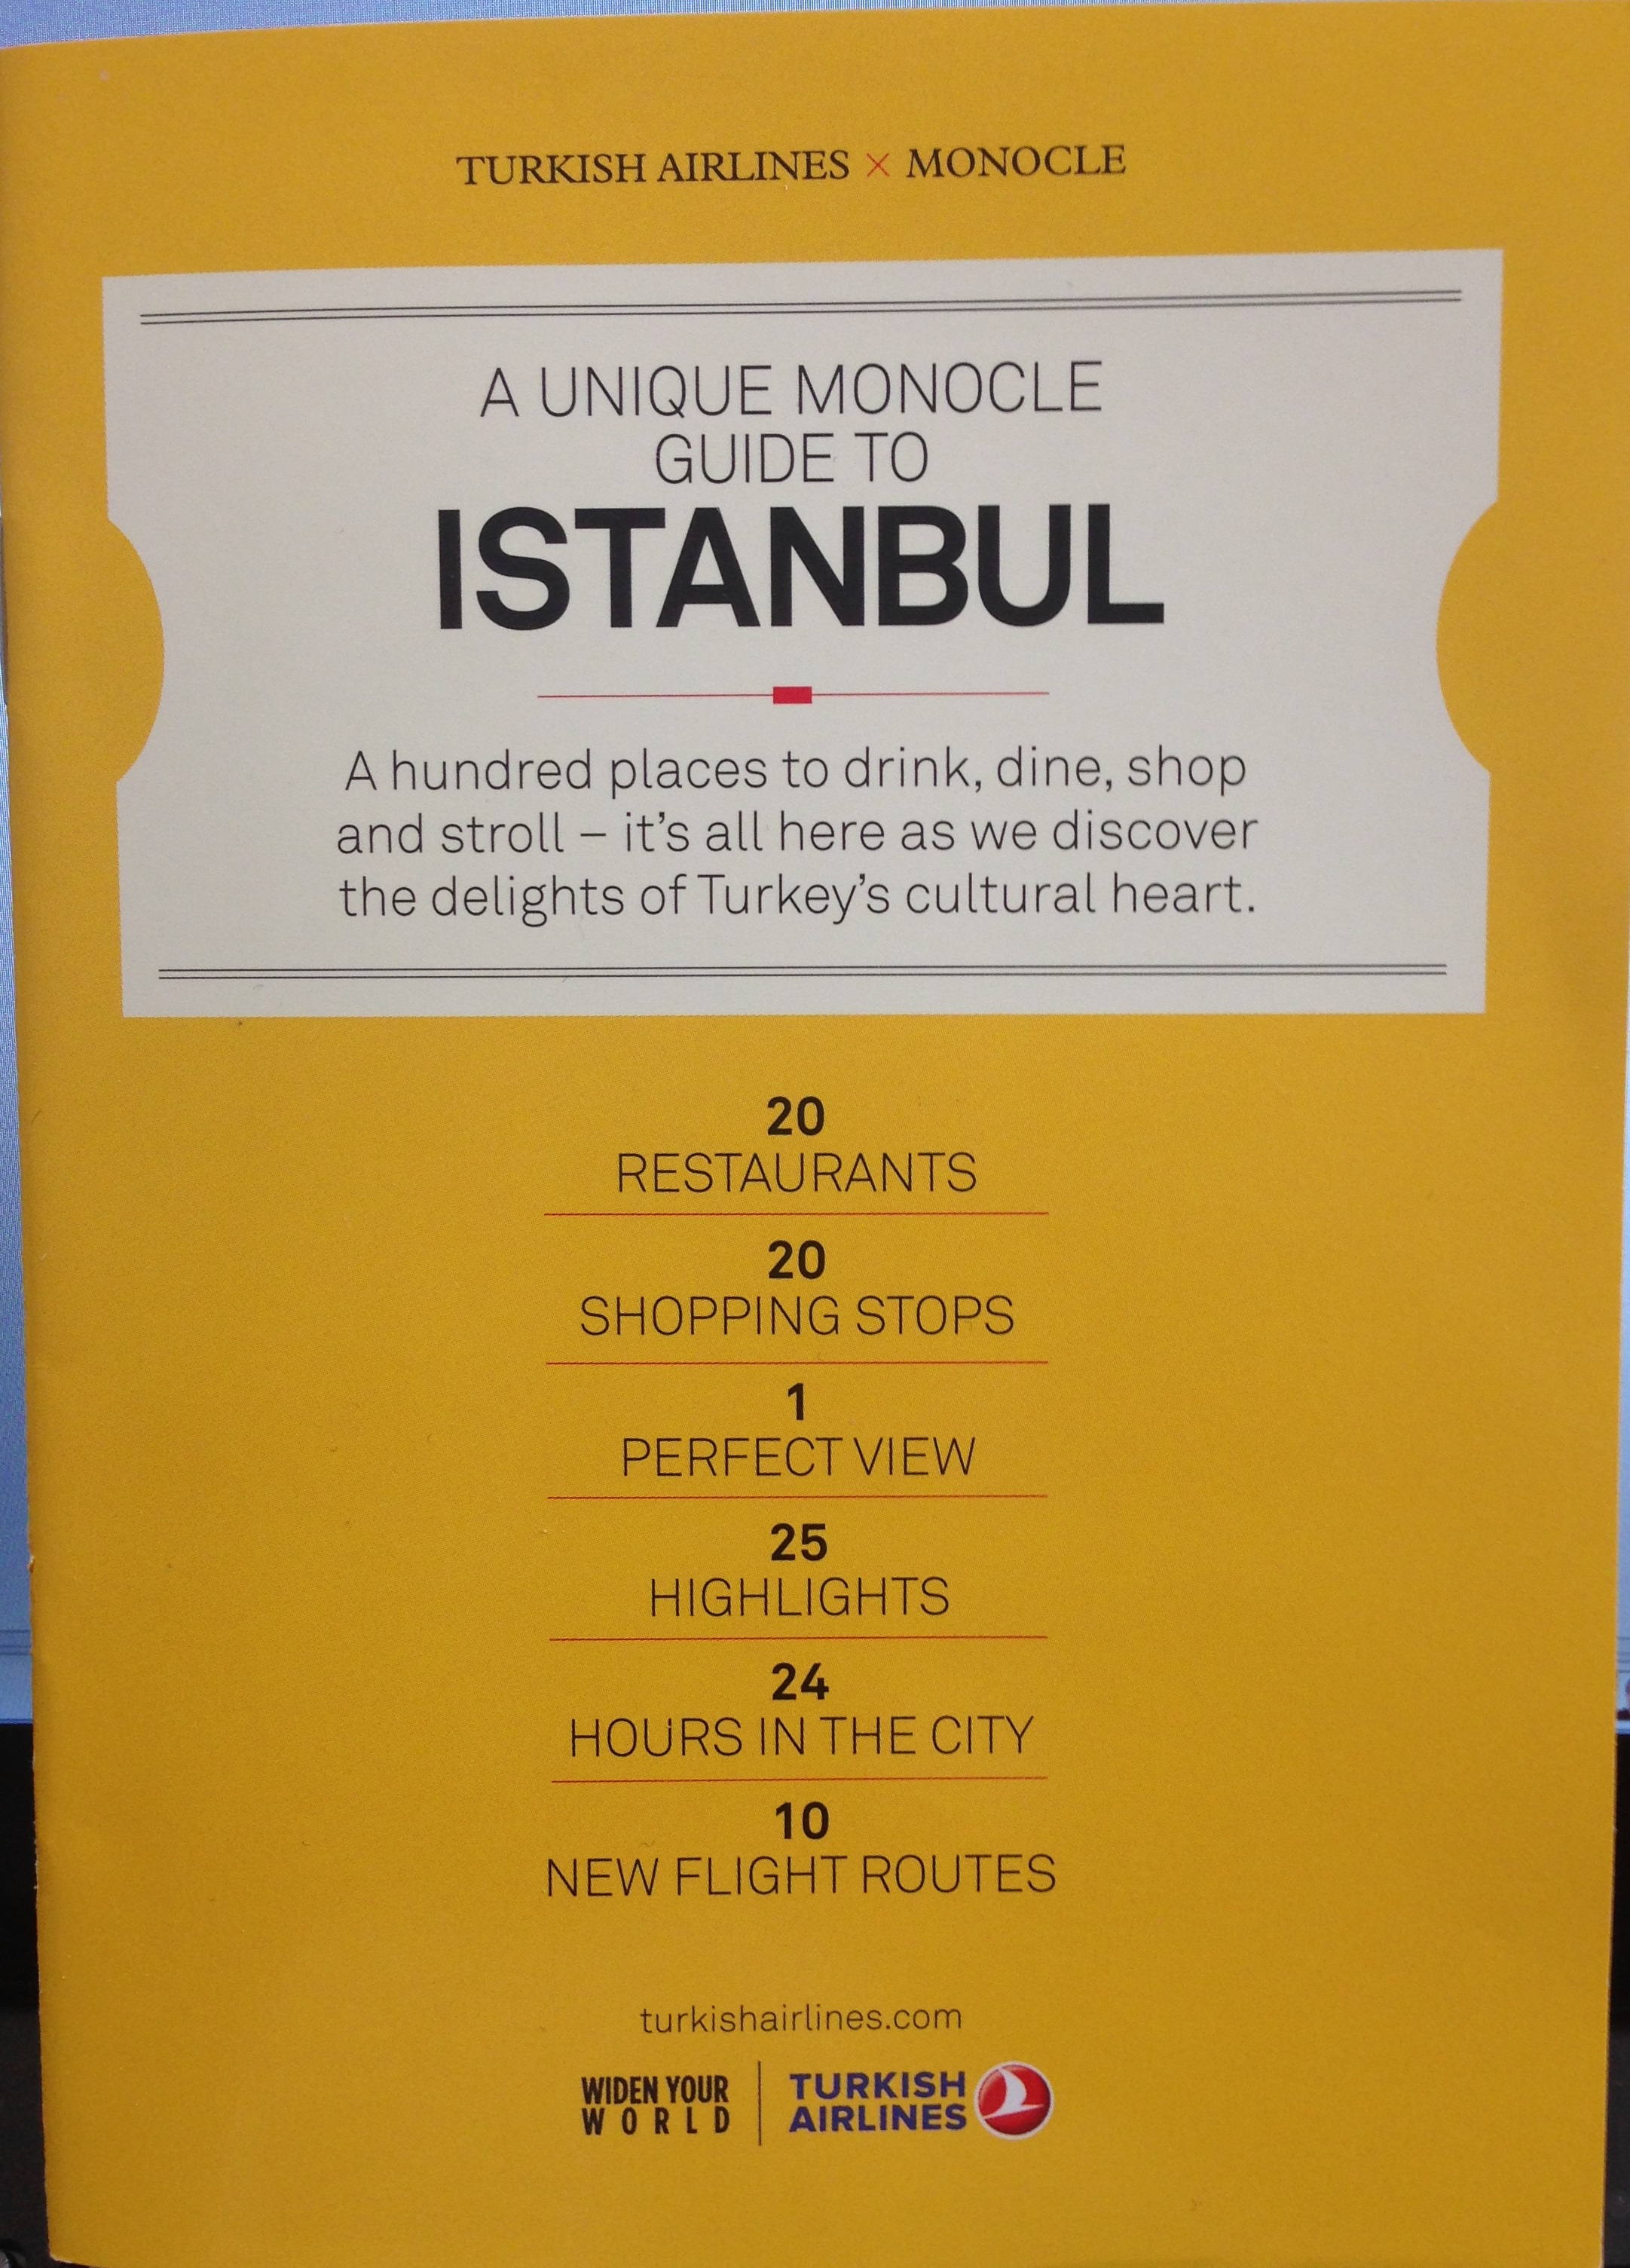 Turkish Airlines – A Unique Monocle Guide to Istanbul